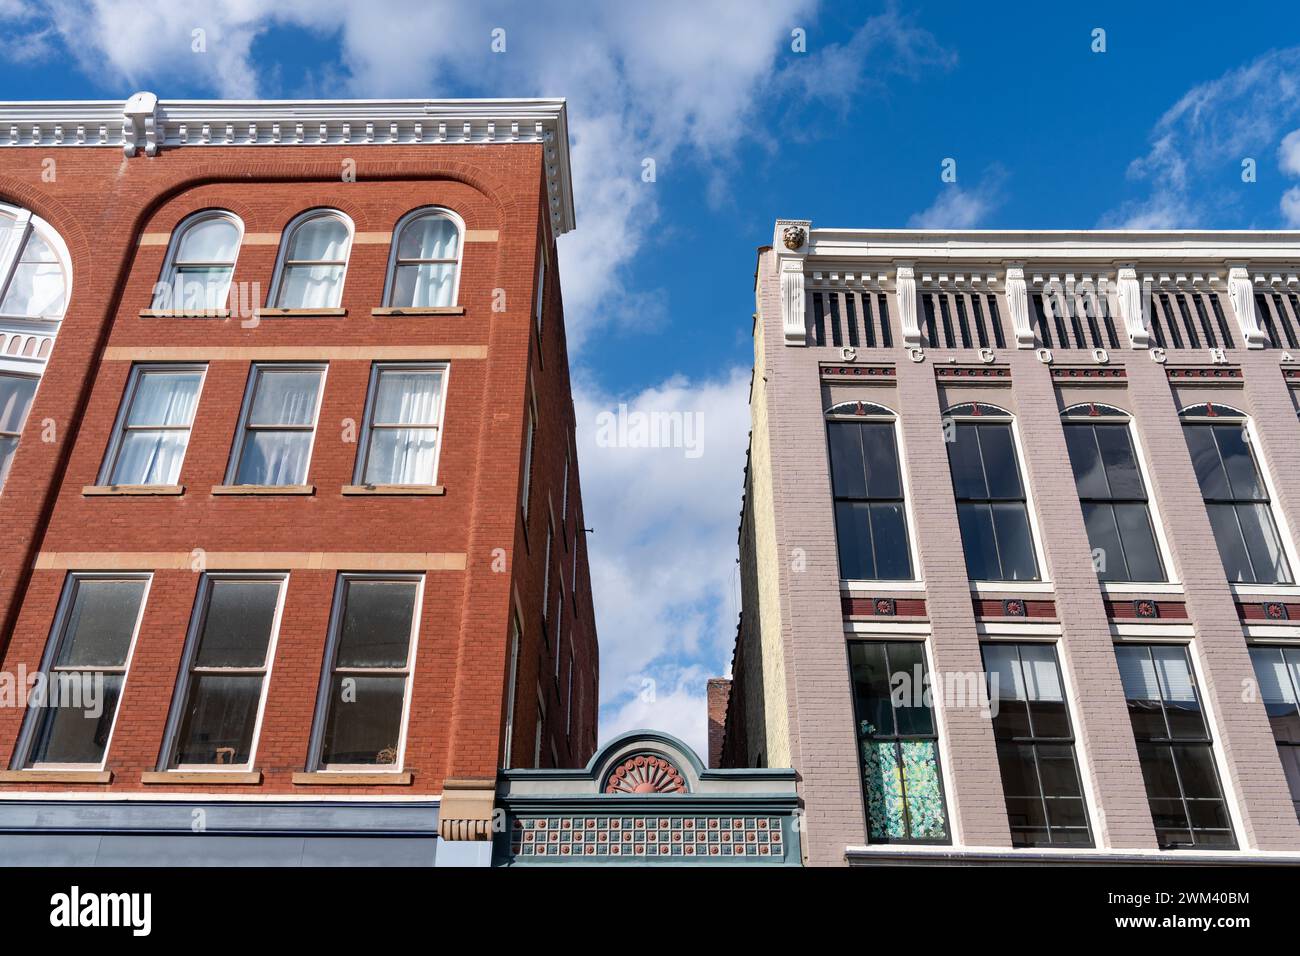 Downtown Staunton, Virginia buildings with significant architectural details against blue sky. There is a gap between the buildings. Stock Photo